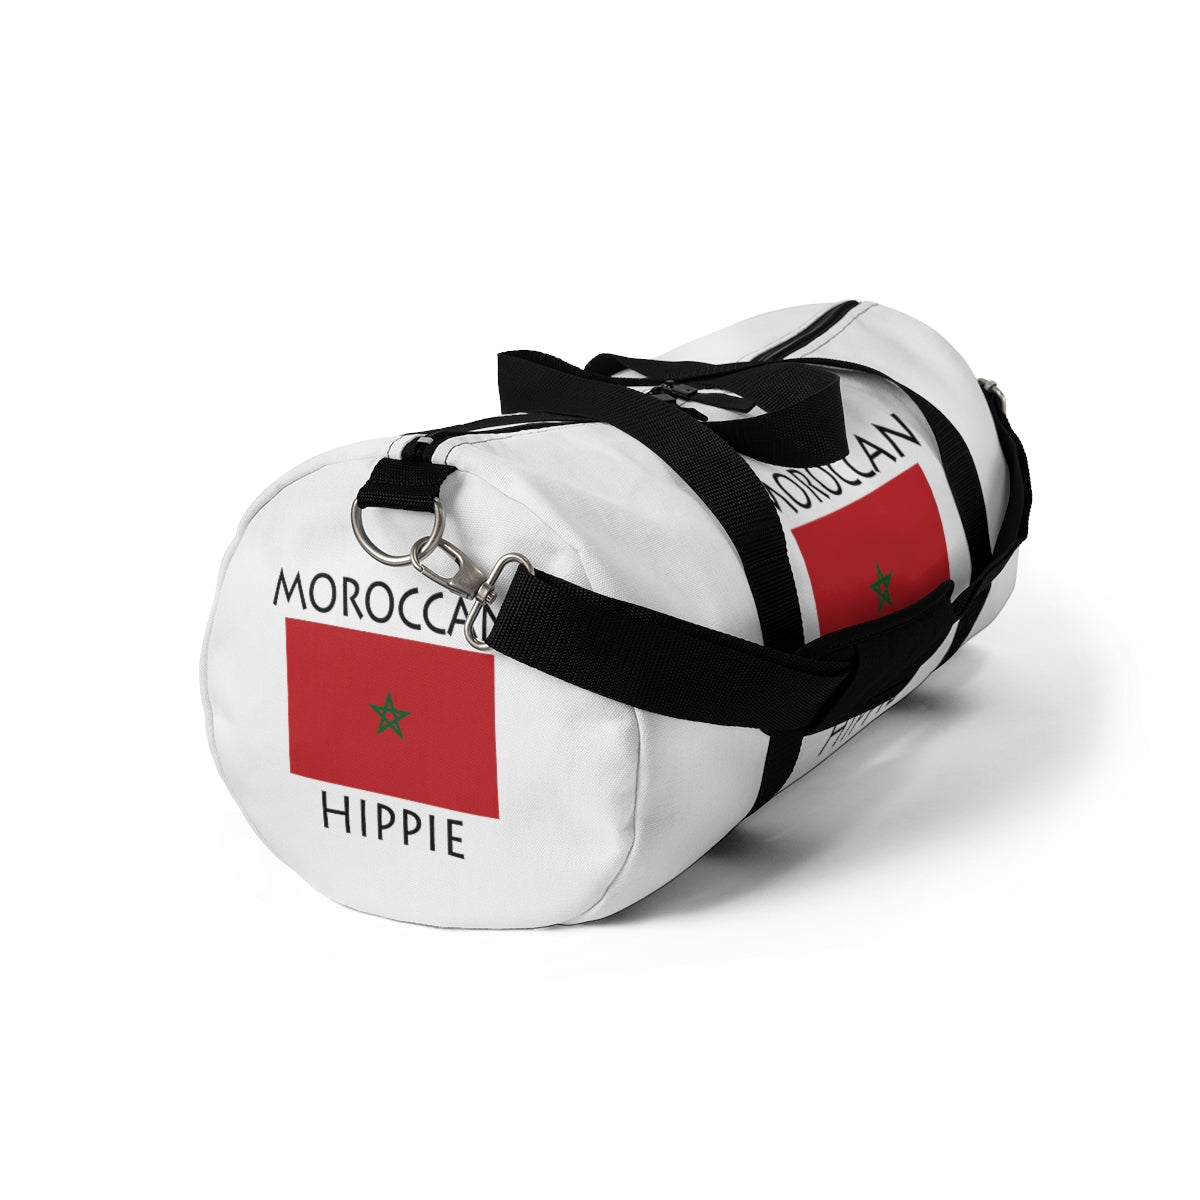  Stately Wear's Moroccan Flag Hippie duffel bag is colorful, iconic and stylish. We are a Katie Couric Shop partner. This duffel bag is the perfect accessory as a beach bag, ski bag, travel bag, shopping bag & gym bag, Pilates bag or yoga bag. Custom made one-at-a-time with environmentally friendly biodegradable inks & dyes. 2 sizes to choose. Stately Wear's bags are very durable, soft and colorful duffels with durable straps.